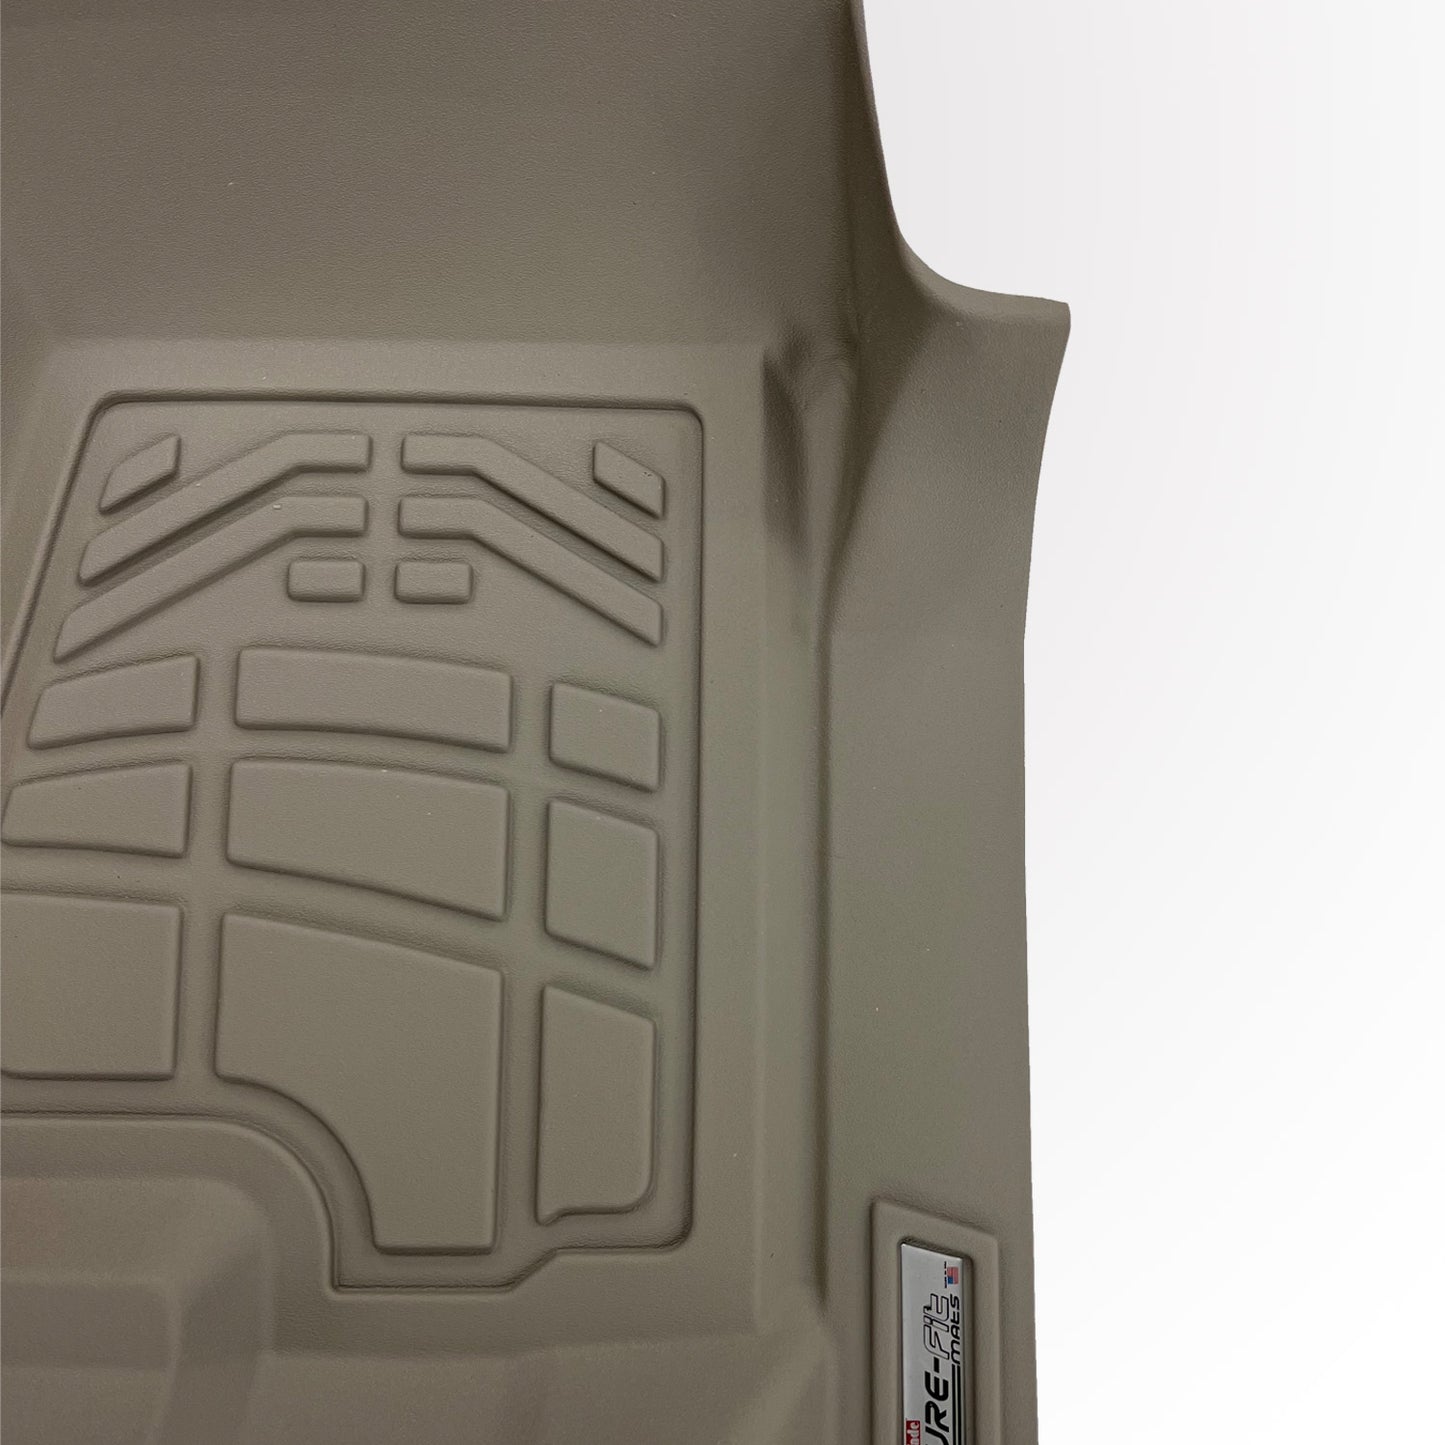 Ford F-150 Floor Mats 2015-2020 | Combo Pack